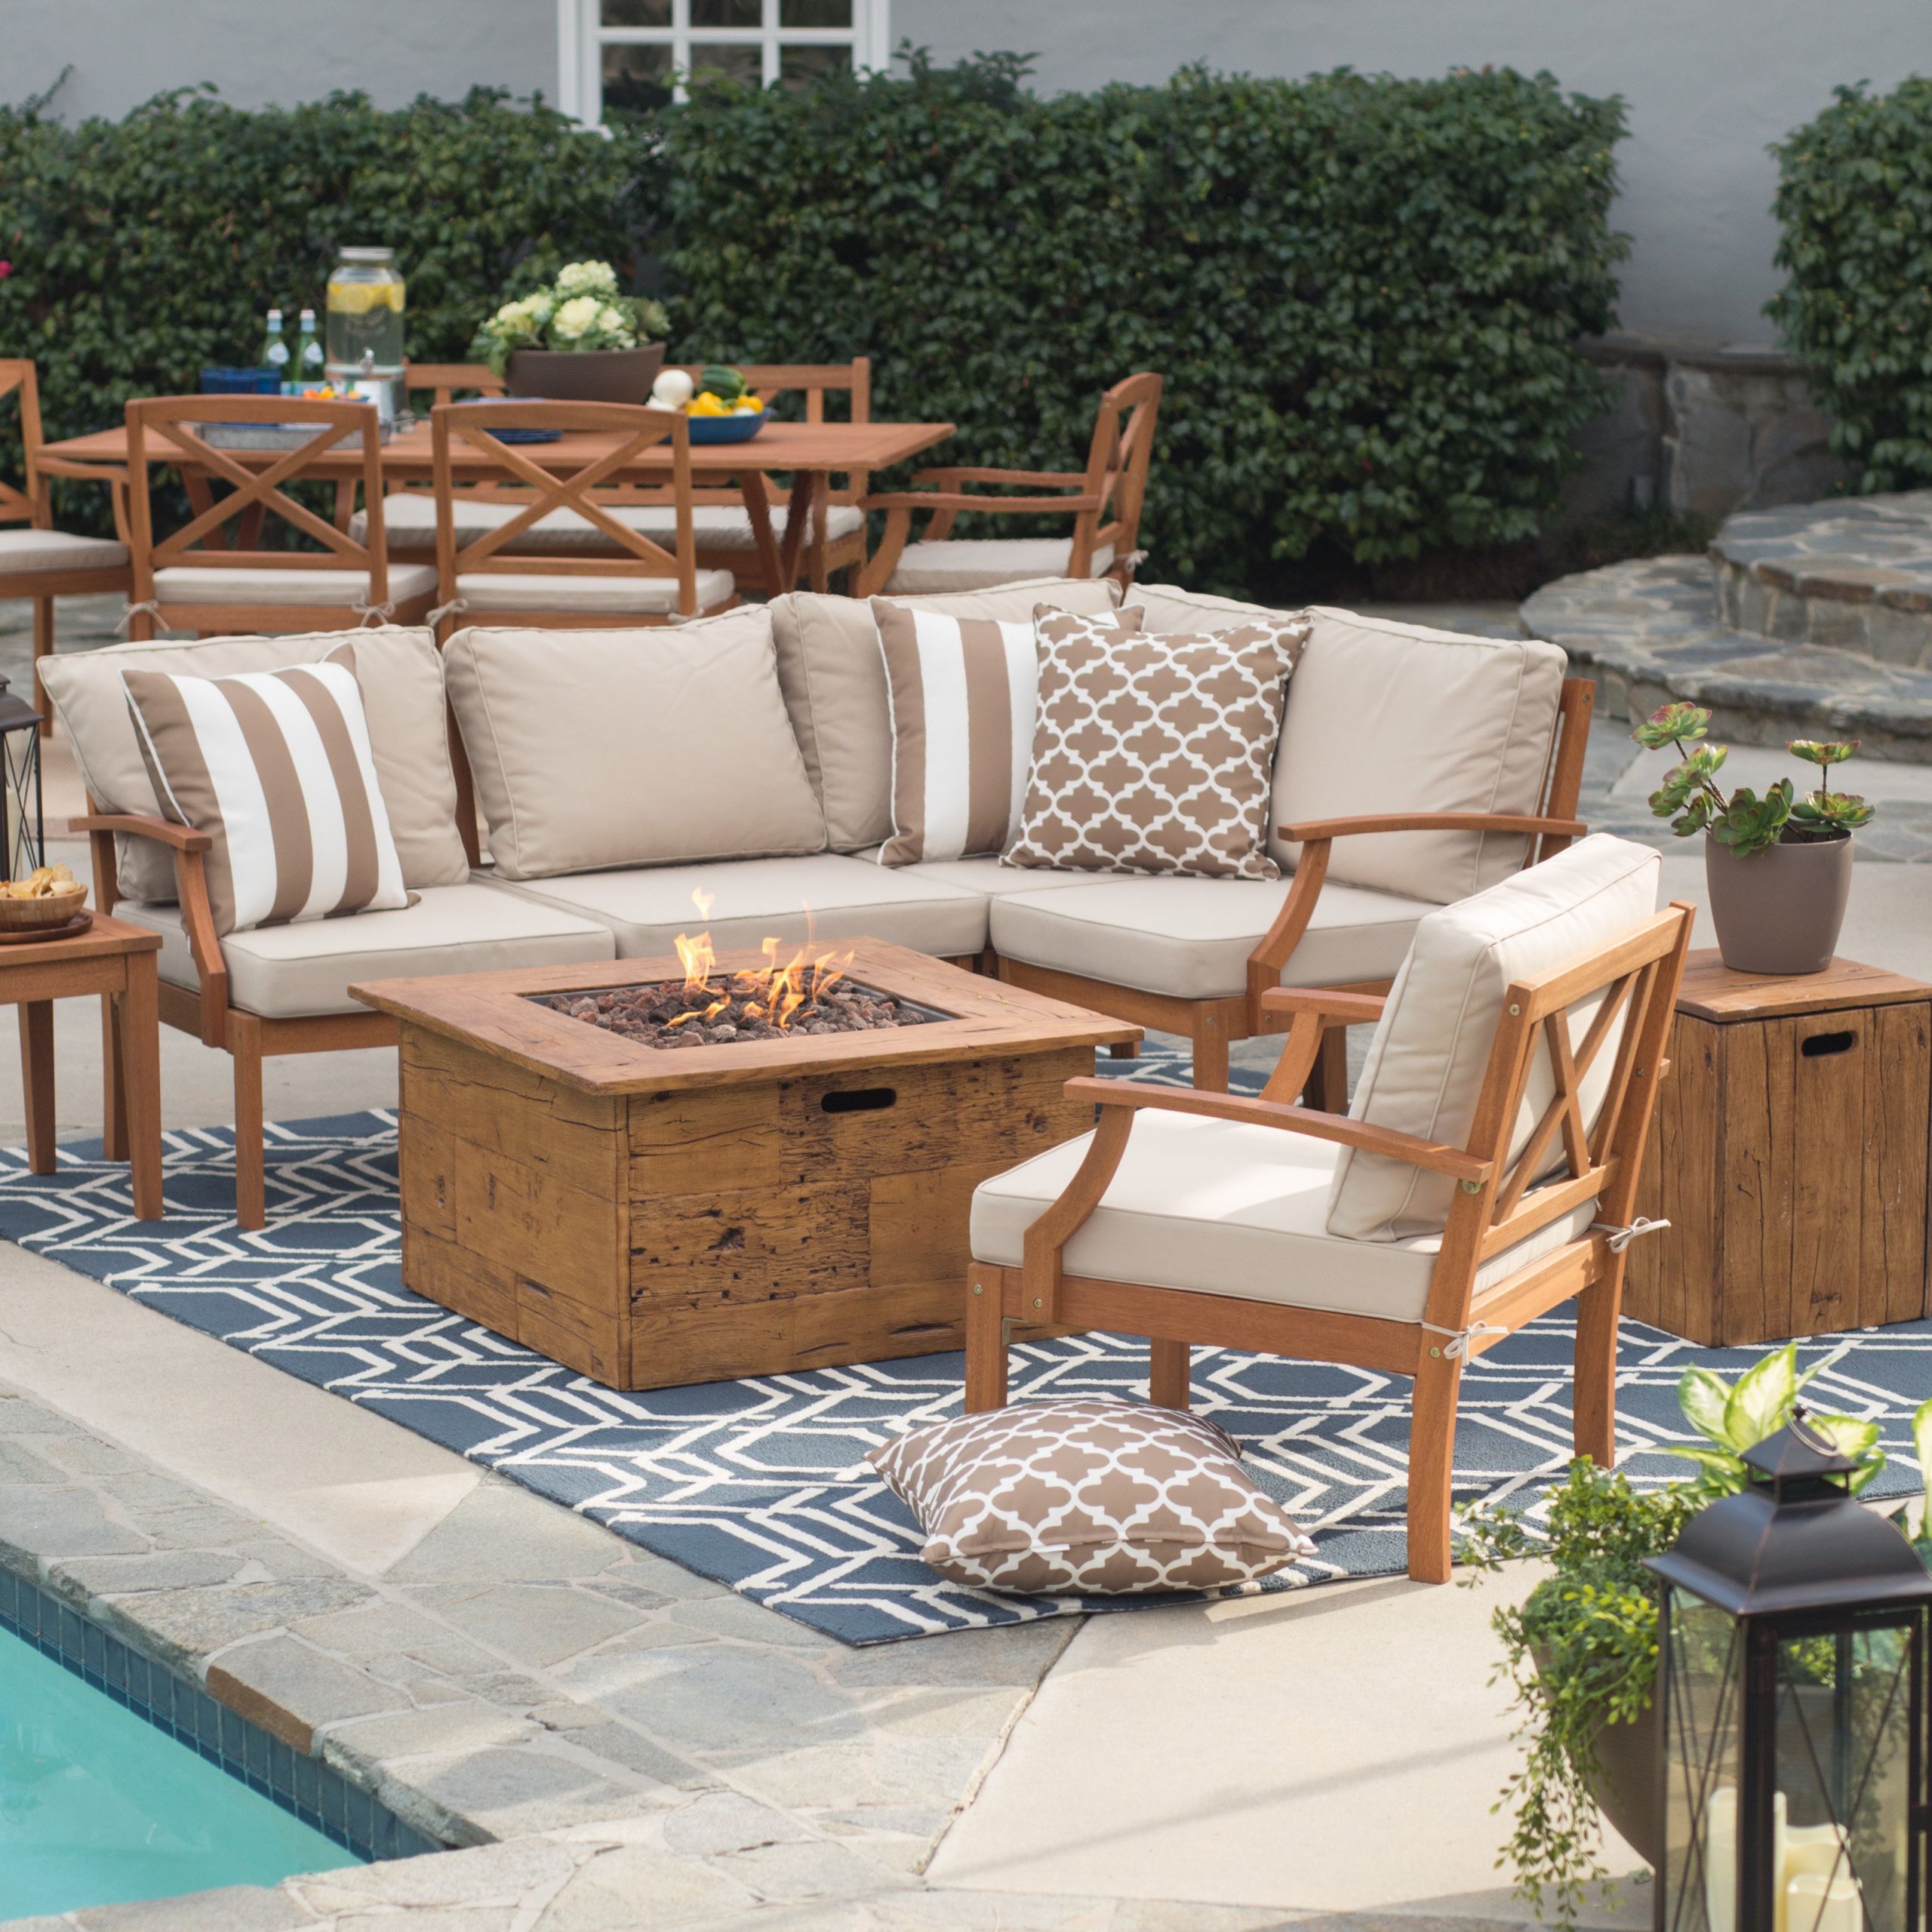 Patio Sets With Fire Pit
 Belham Living Brighton Outdoor Wood Conversation Set with